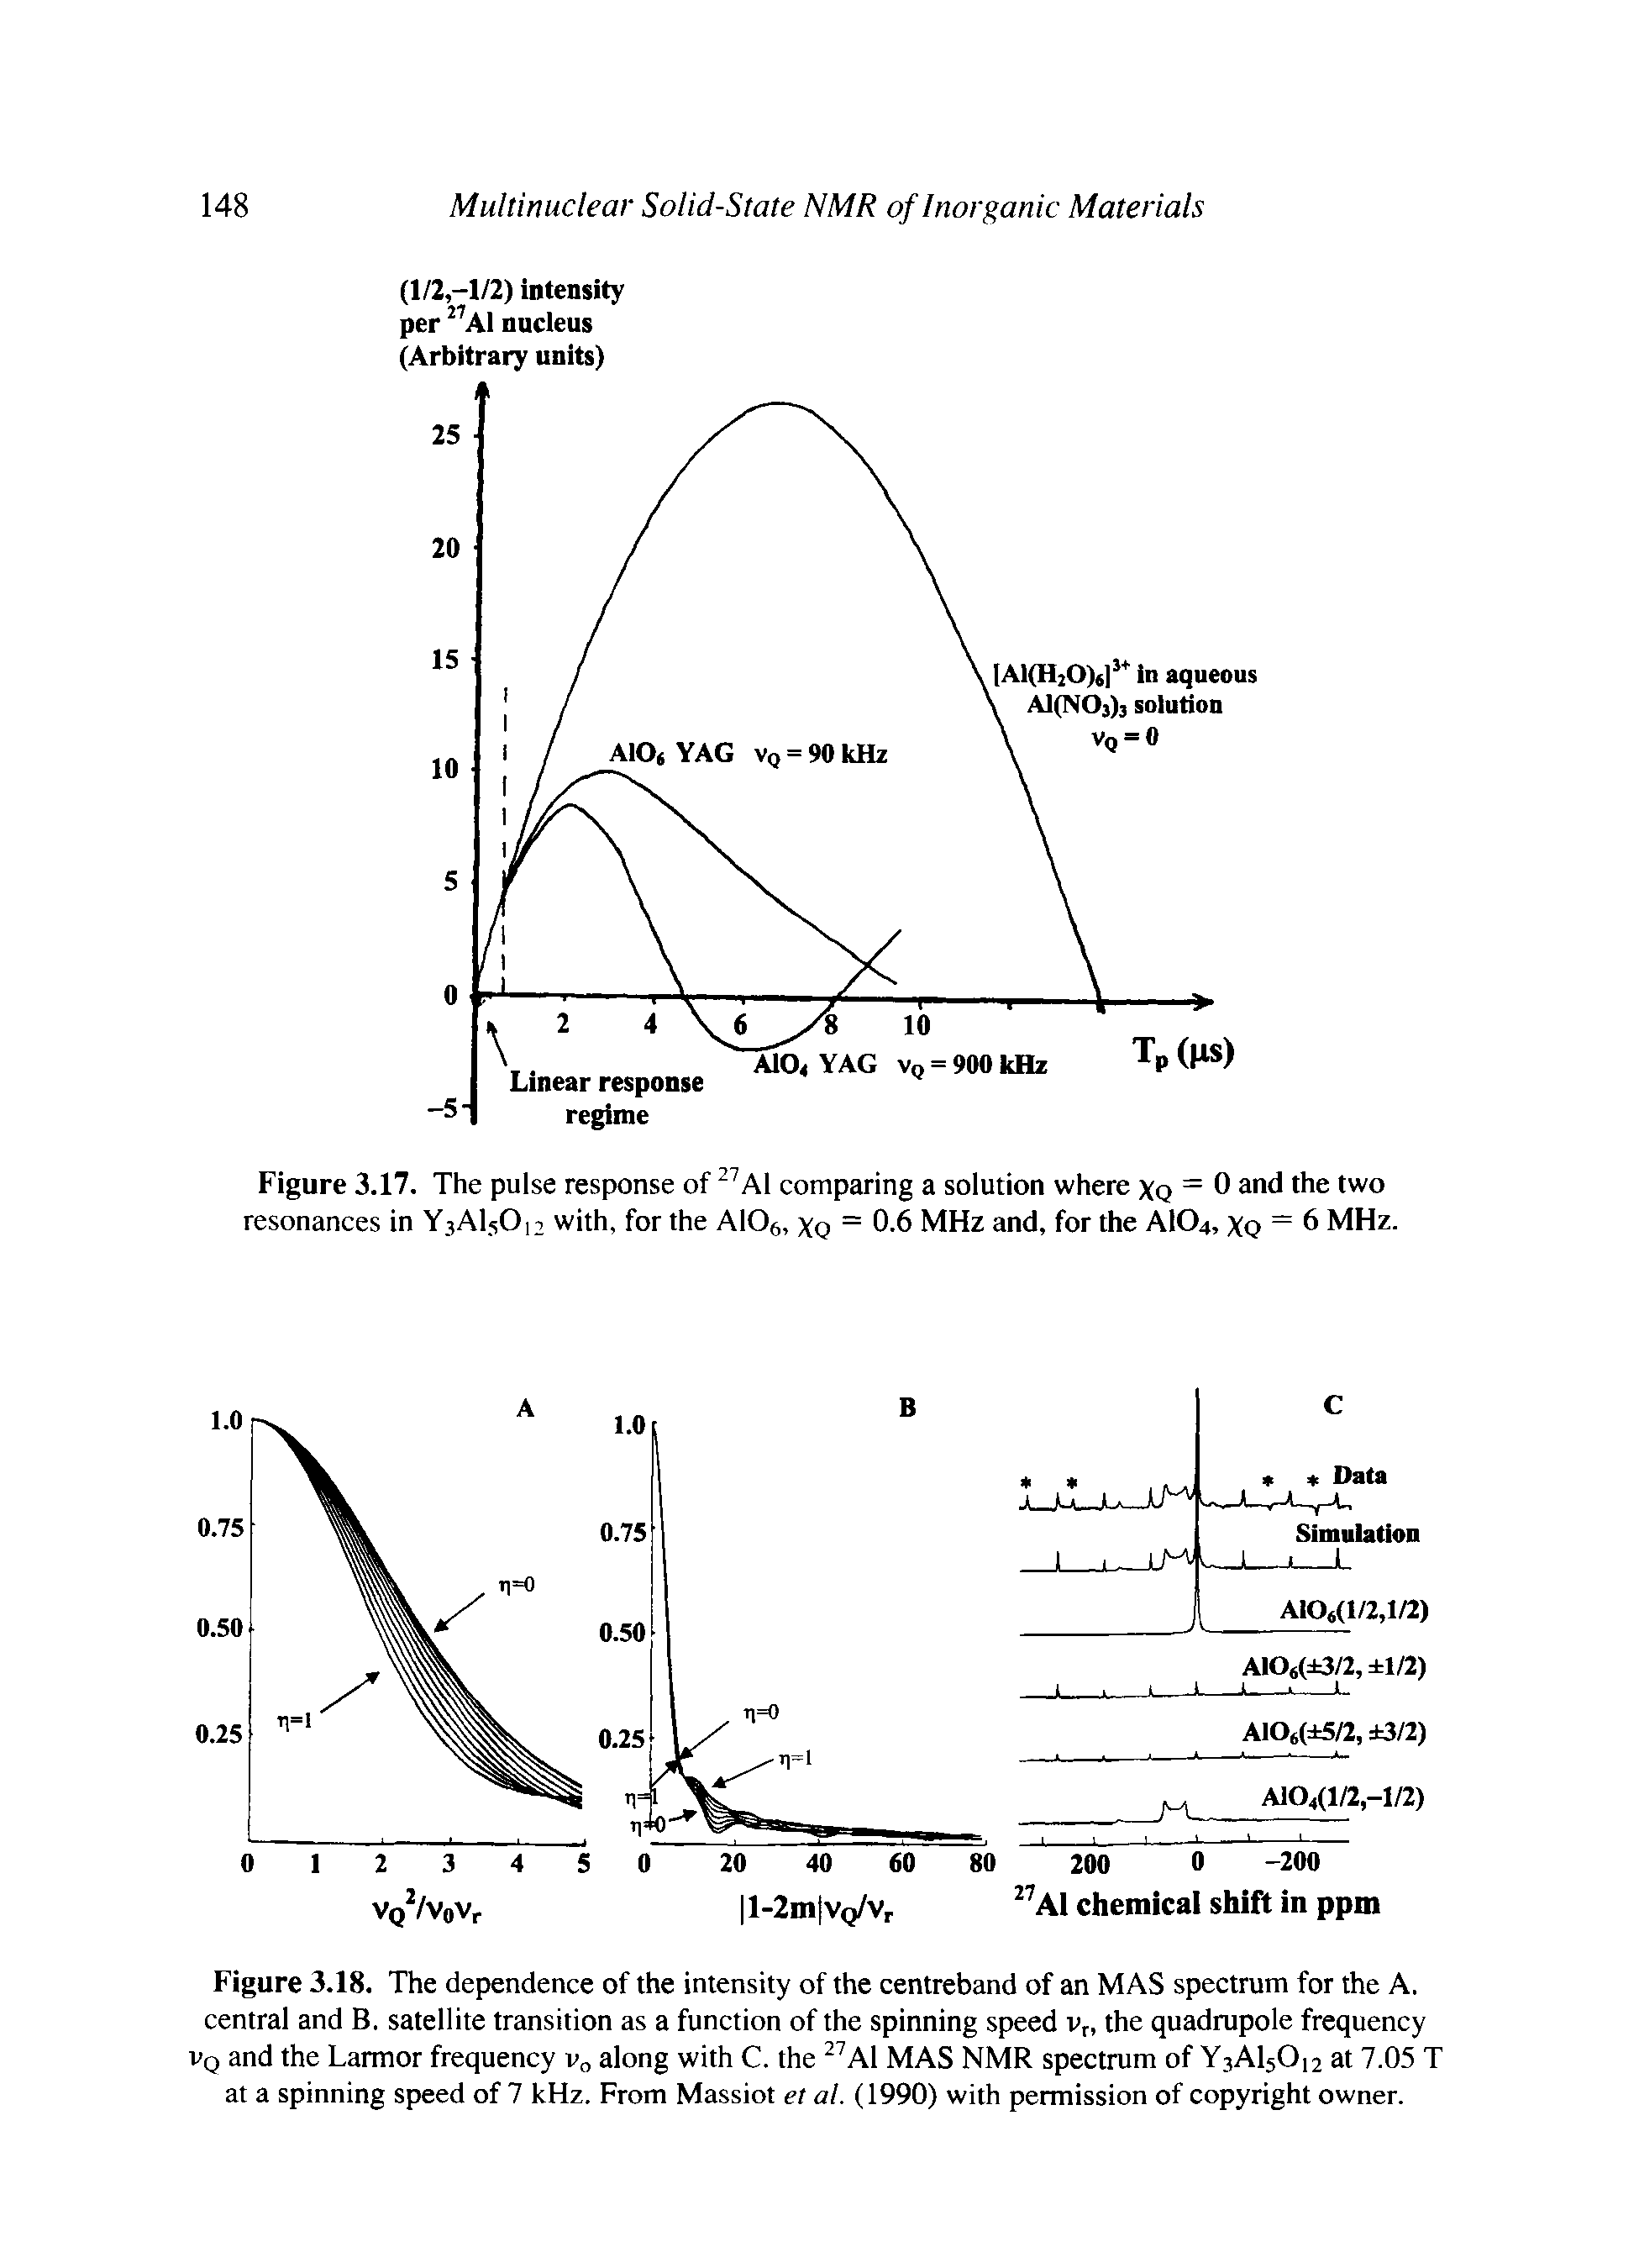 Figure 3.18. The dependence of the intensity of the centreband of an MAS spectrum for the A. central and B. satellite transition as a function of the spinning speed v, the quadrupole frequency vq and the Larmor frequency Vo along with C. the Al MAS NMR spectrum of Y3AI5O12 at 7.05 T at a spinning speed of 7 kHz. From Massiot et al. (1990) with permission of copyright owner.